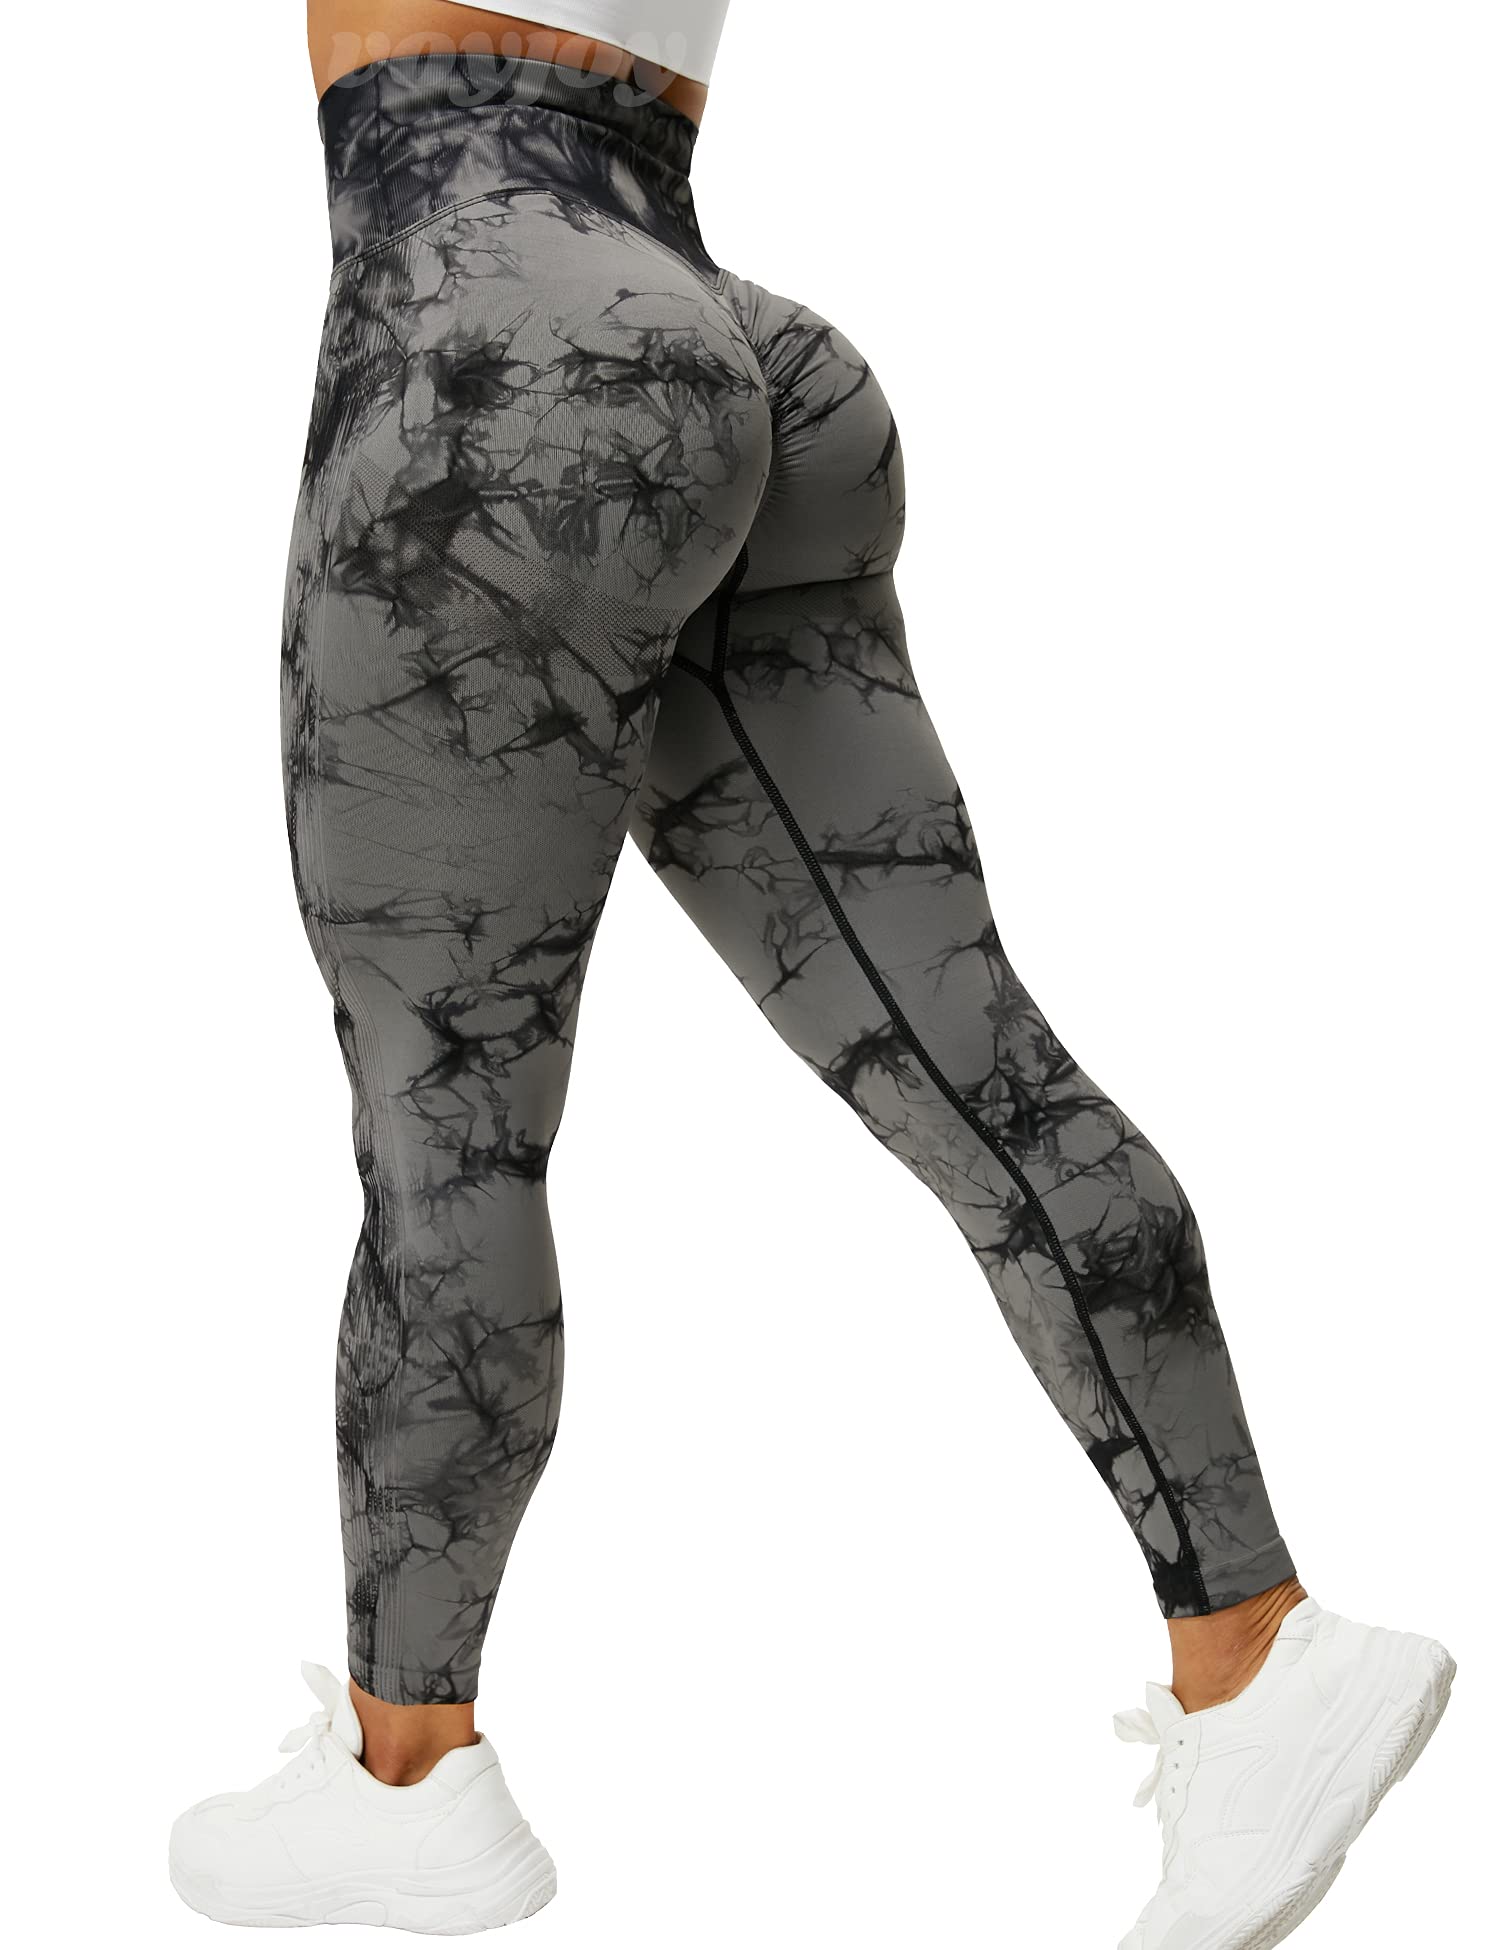 one young woman wearing grey camoflage Yogapants at the gym, blonde  pigtails, curly hair, doing yoga, backwards - SeaArt AI